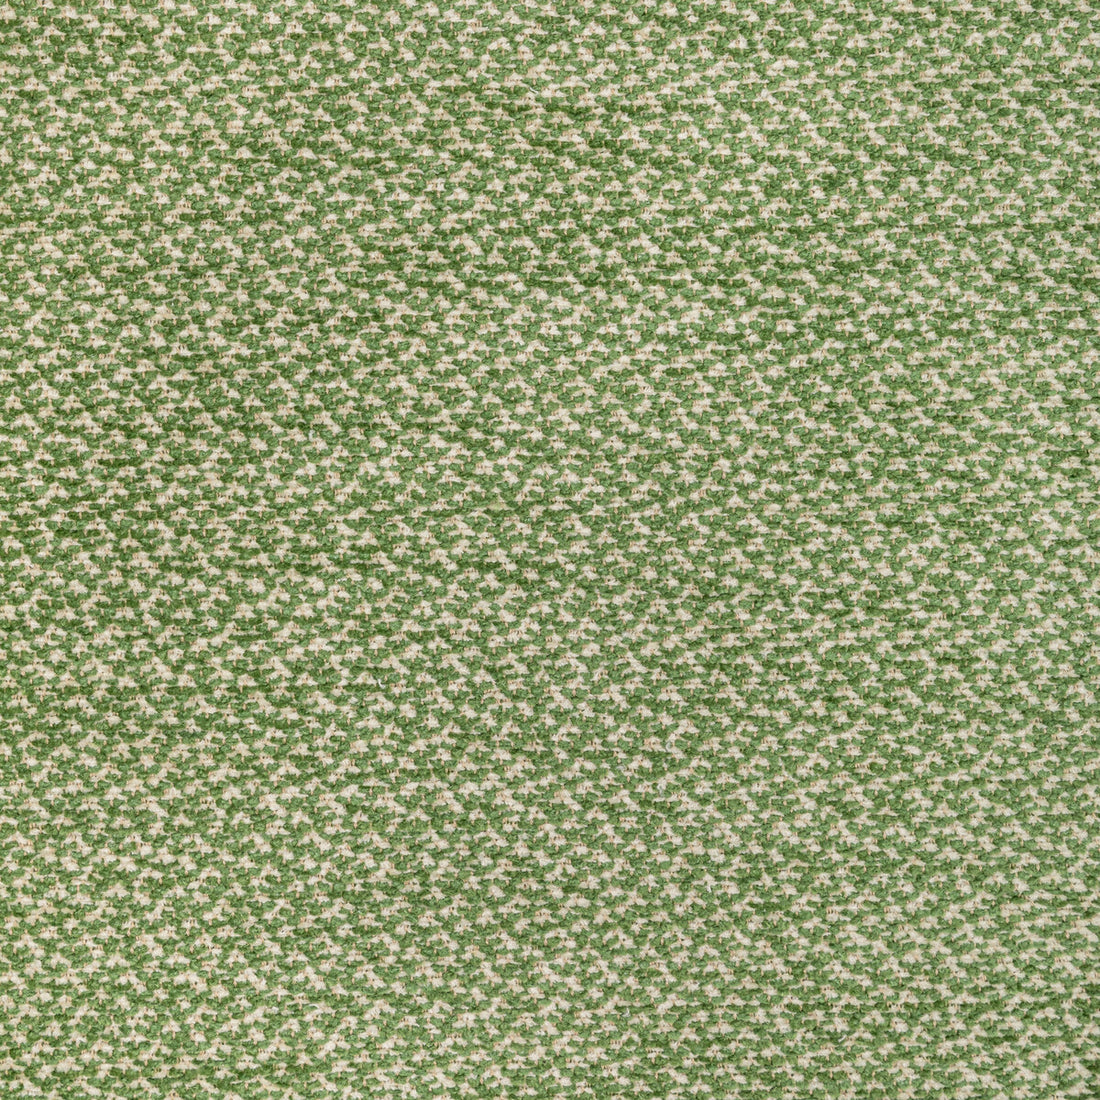 Sasson Texture fabric in green color - pattern 8022122.3.0 - by Brunschwig &amp; Fils in the Chambery Textures III collection